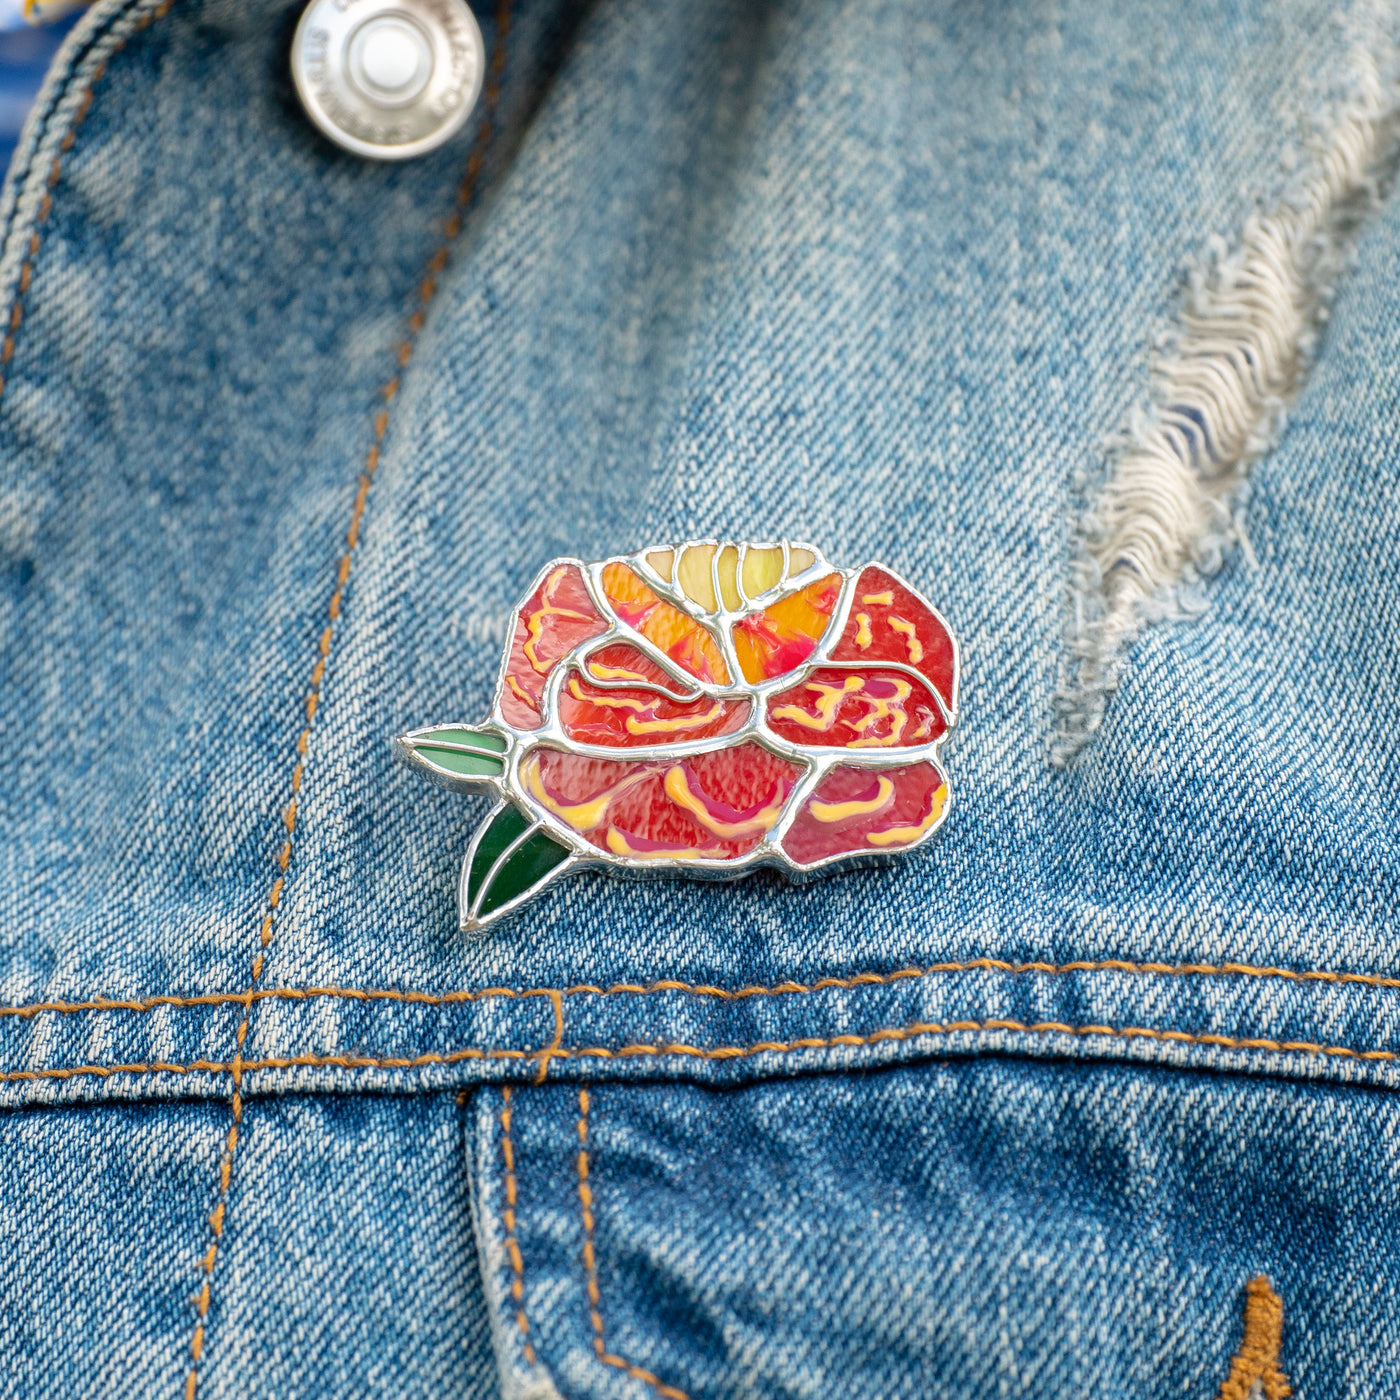 Marigold brooch of stained glass on a jeans jacket